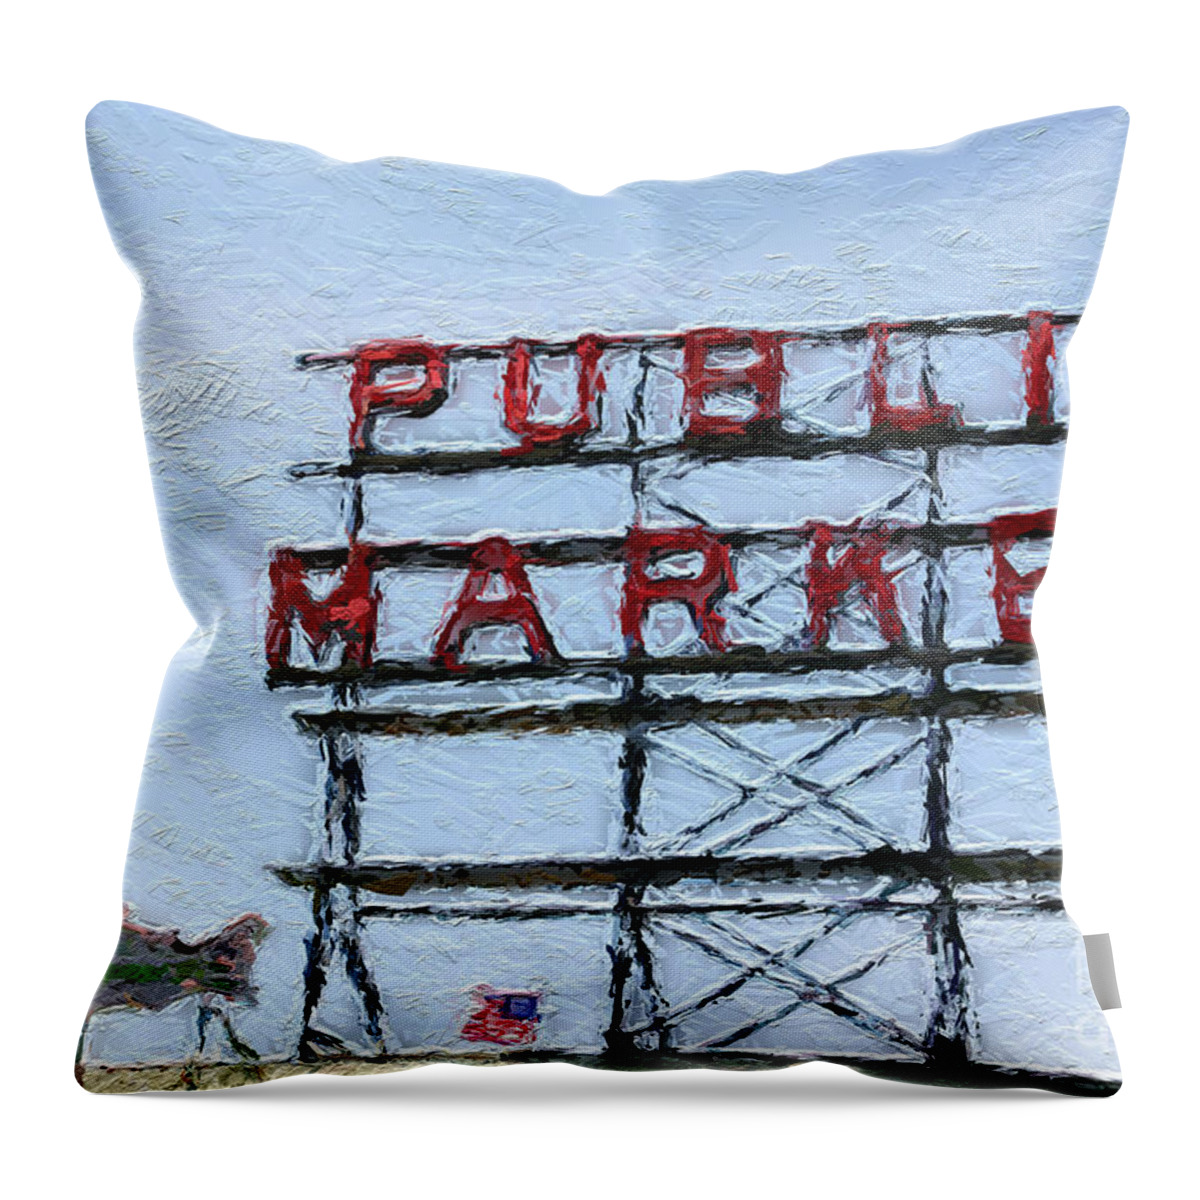 Seattle Throw Pillow featuring the painting Pike Place Market by Linda Woods